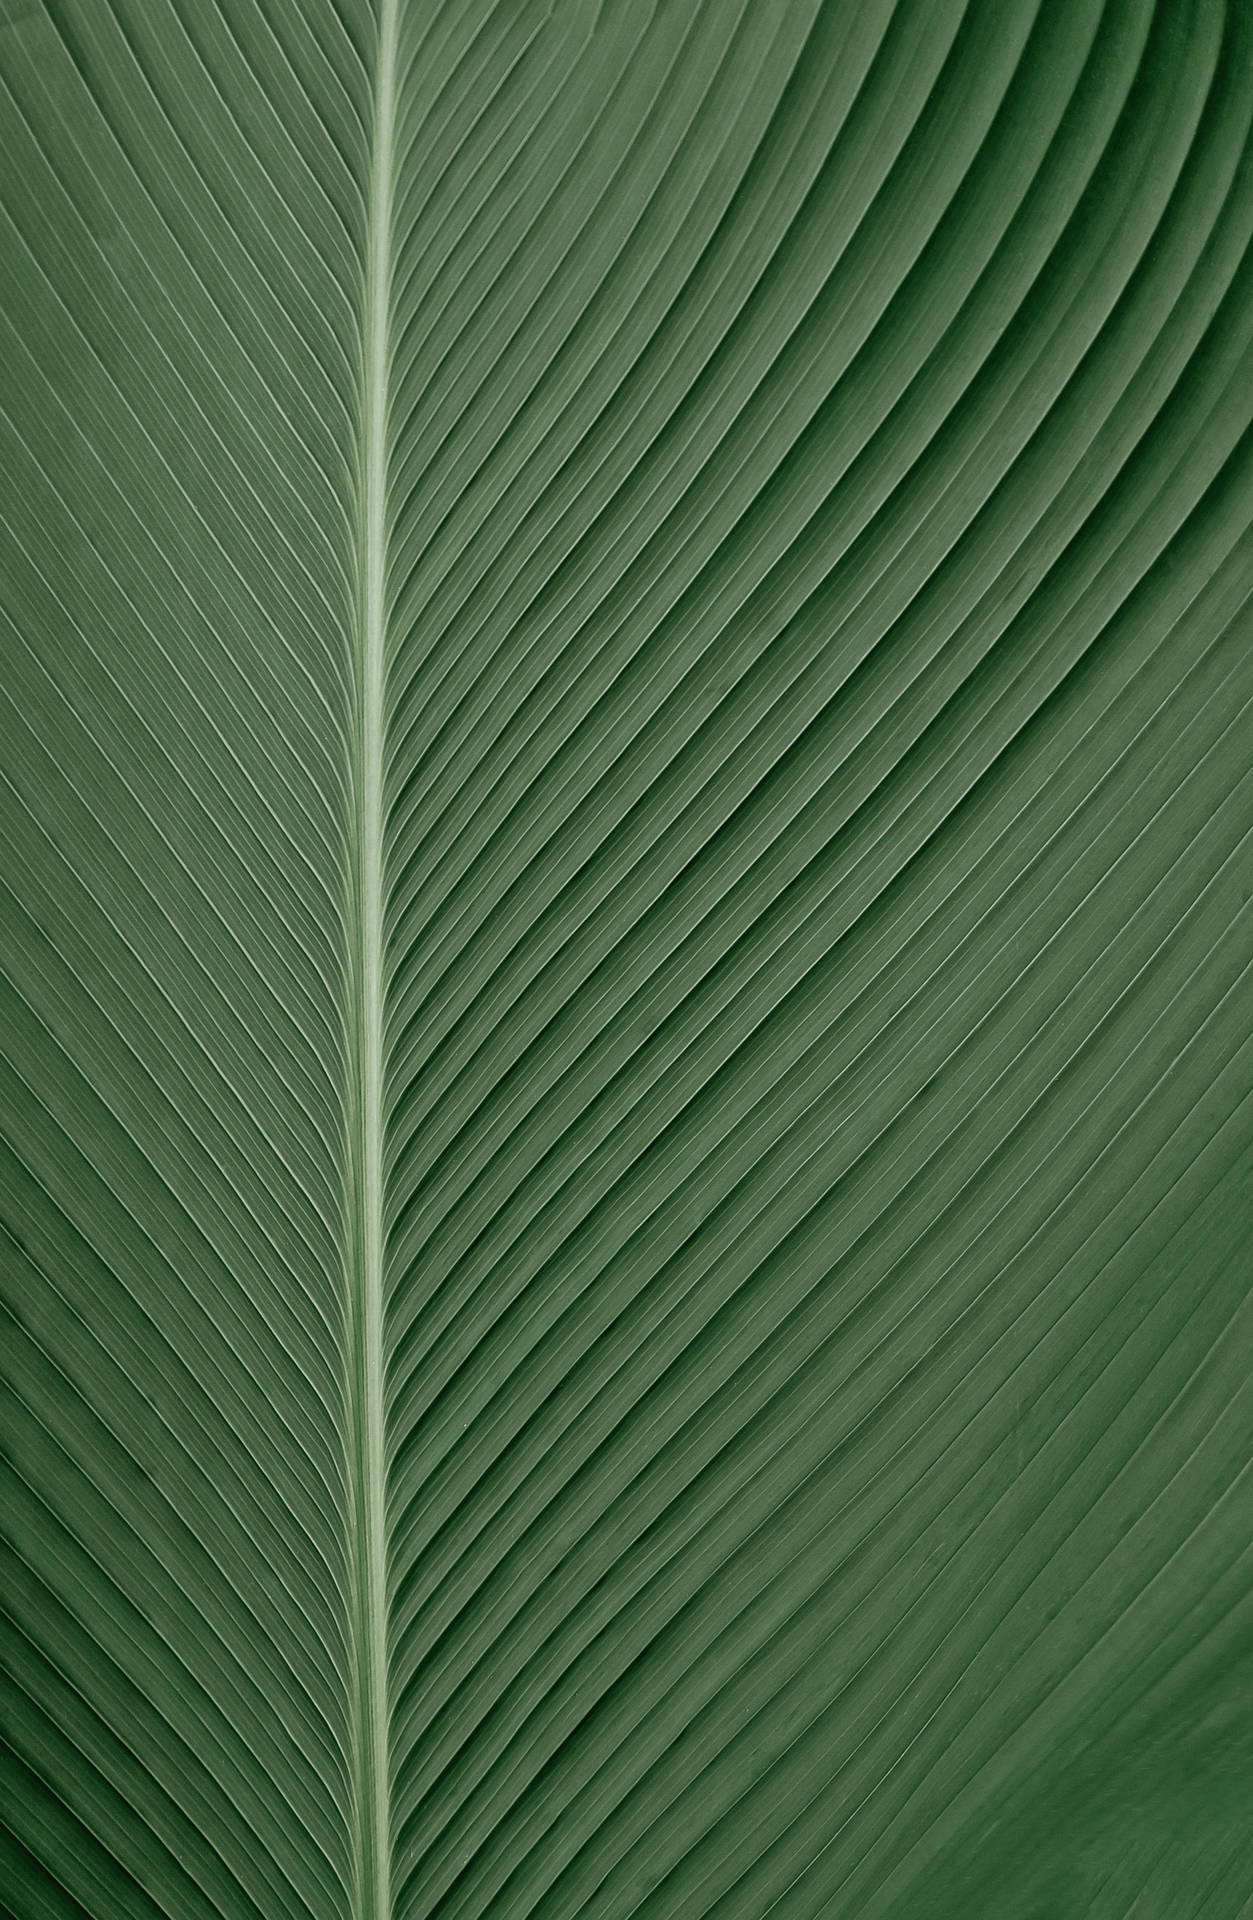 3128X4794 Leaf Wallpaper and Background